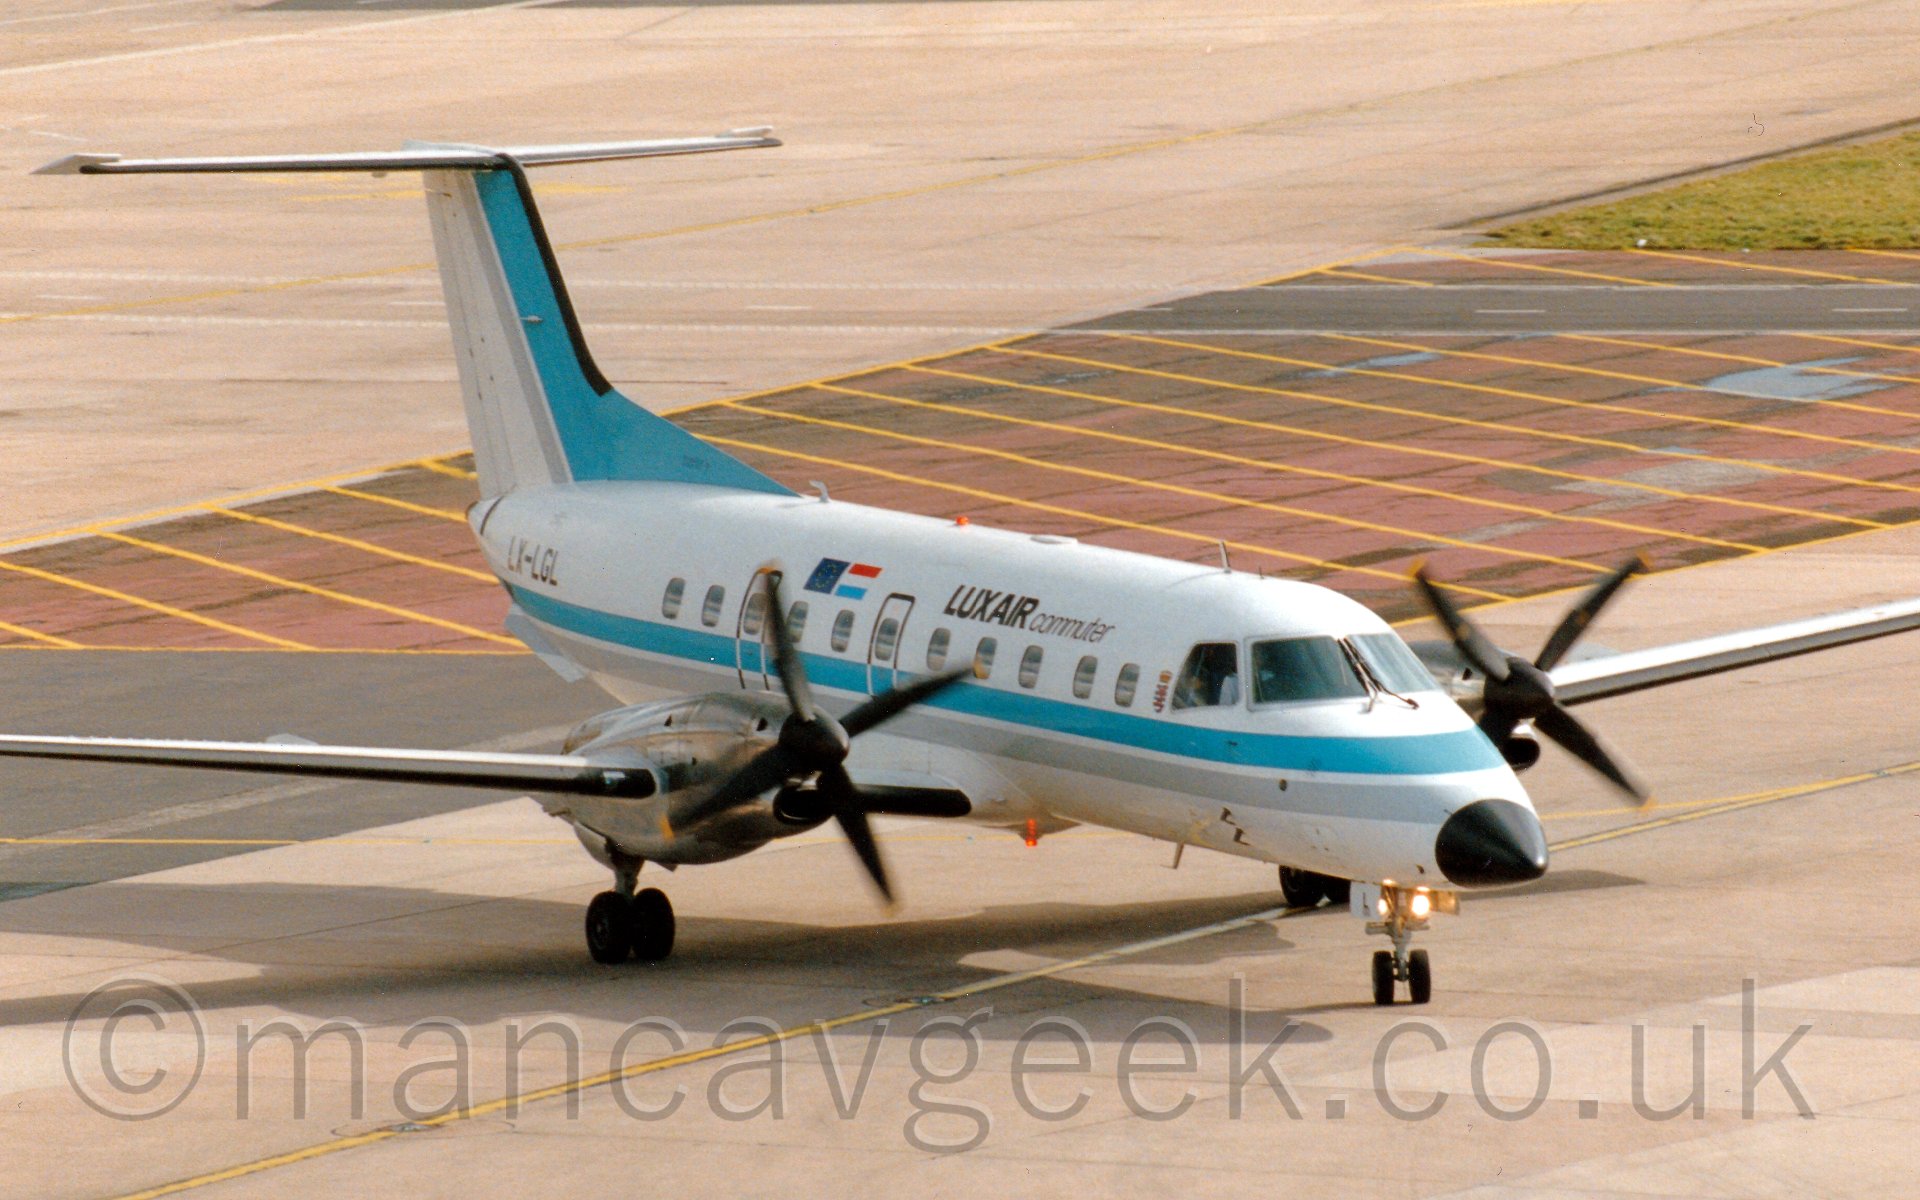 Side view of a twin propellor engined airliner taxiing from left to right, seen from a slightly elevated viewpoint. The plane is mostly white, with a light blue and grey stripe running along the body, repeated diagonally on the tail. There are large "Luxair" and smaller "Commuter" titles in black on the upper forward fuselage, with the flags of both the EU and Luxembourg a bit further back. The registration "LX-LGL" is on the rear fuselage in black. In the background, grey concrete apron fills most of the screen, with red-painted concrete with yellow hatchingdelineating a non-accessible area in the middle.